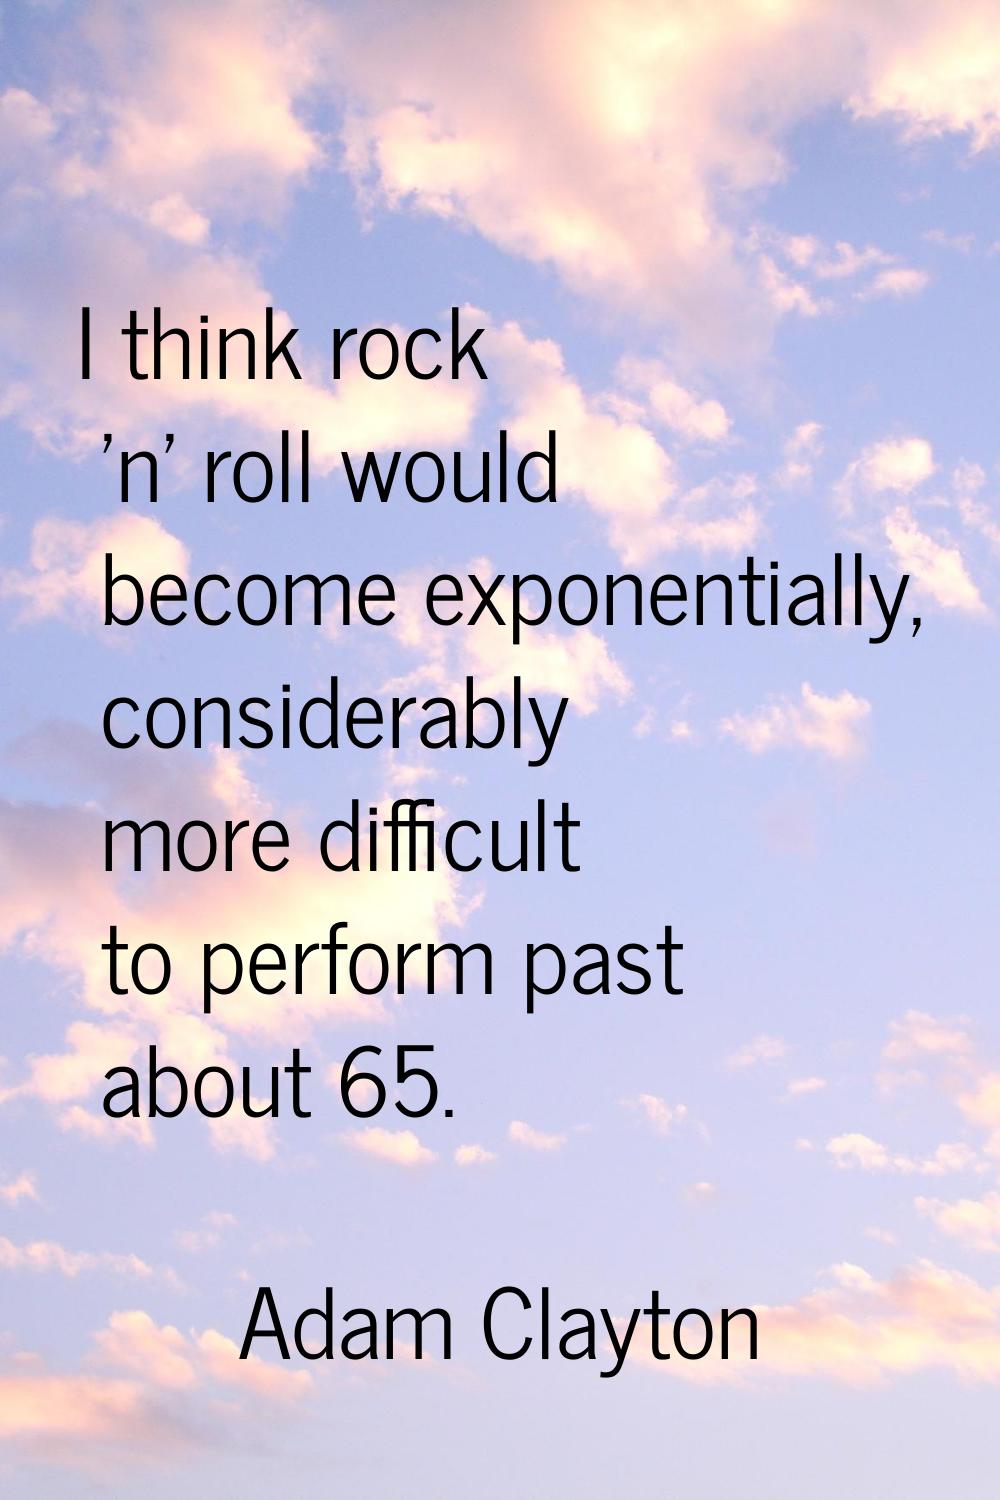 I think rock 'n' roll would become exponentially, considerably more difficult to perform past about